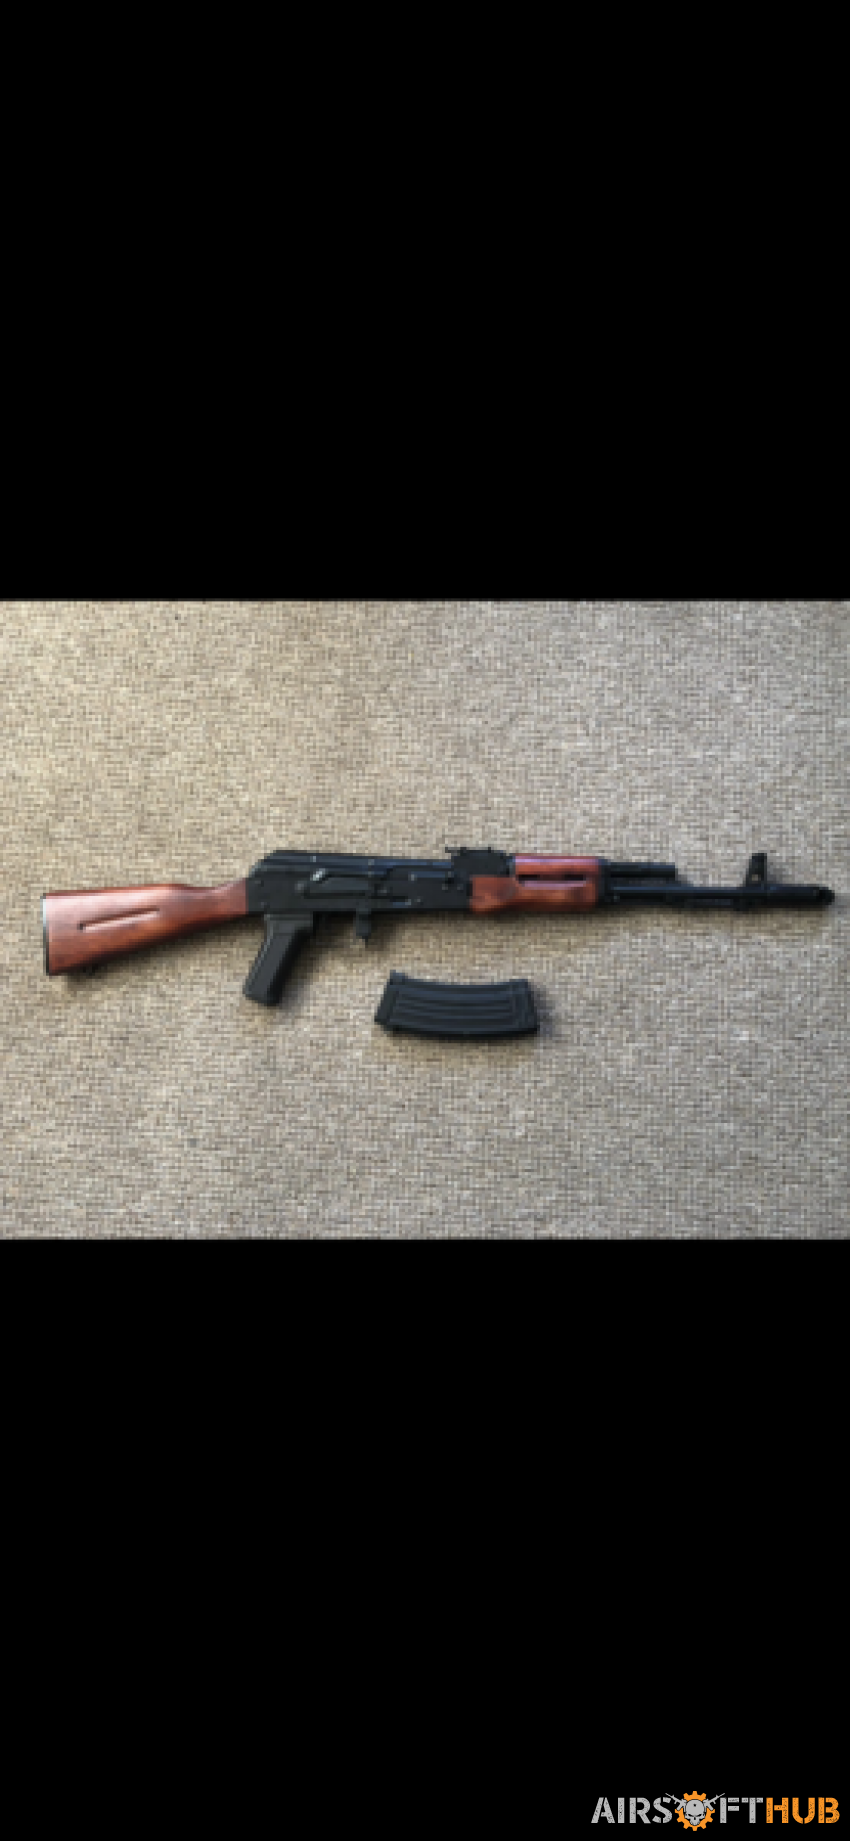 Aps ak 74 used nearly new - Used airsoft equipment